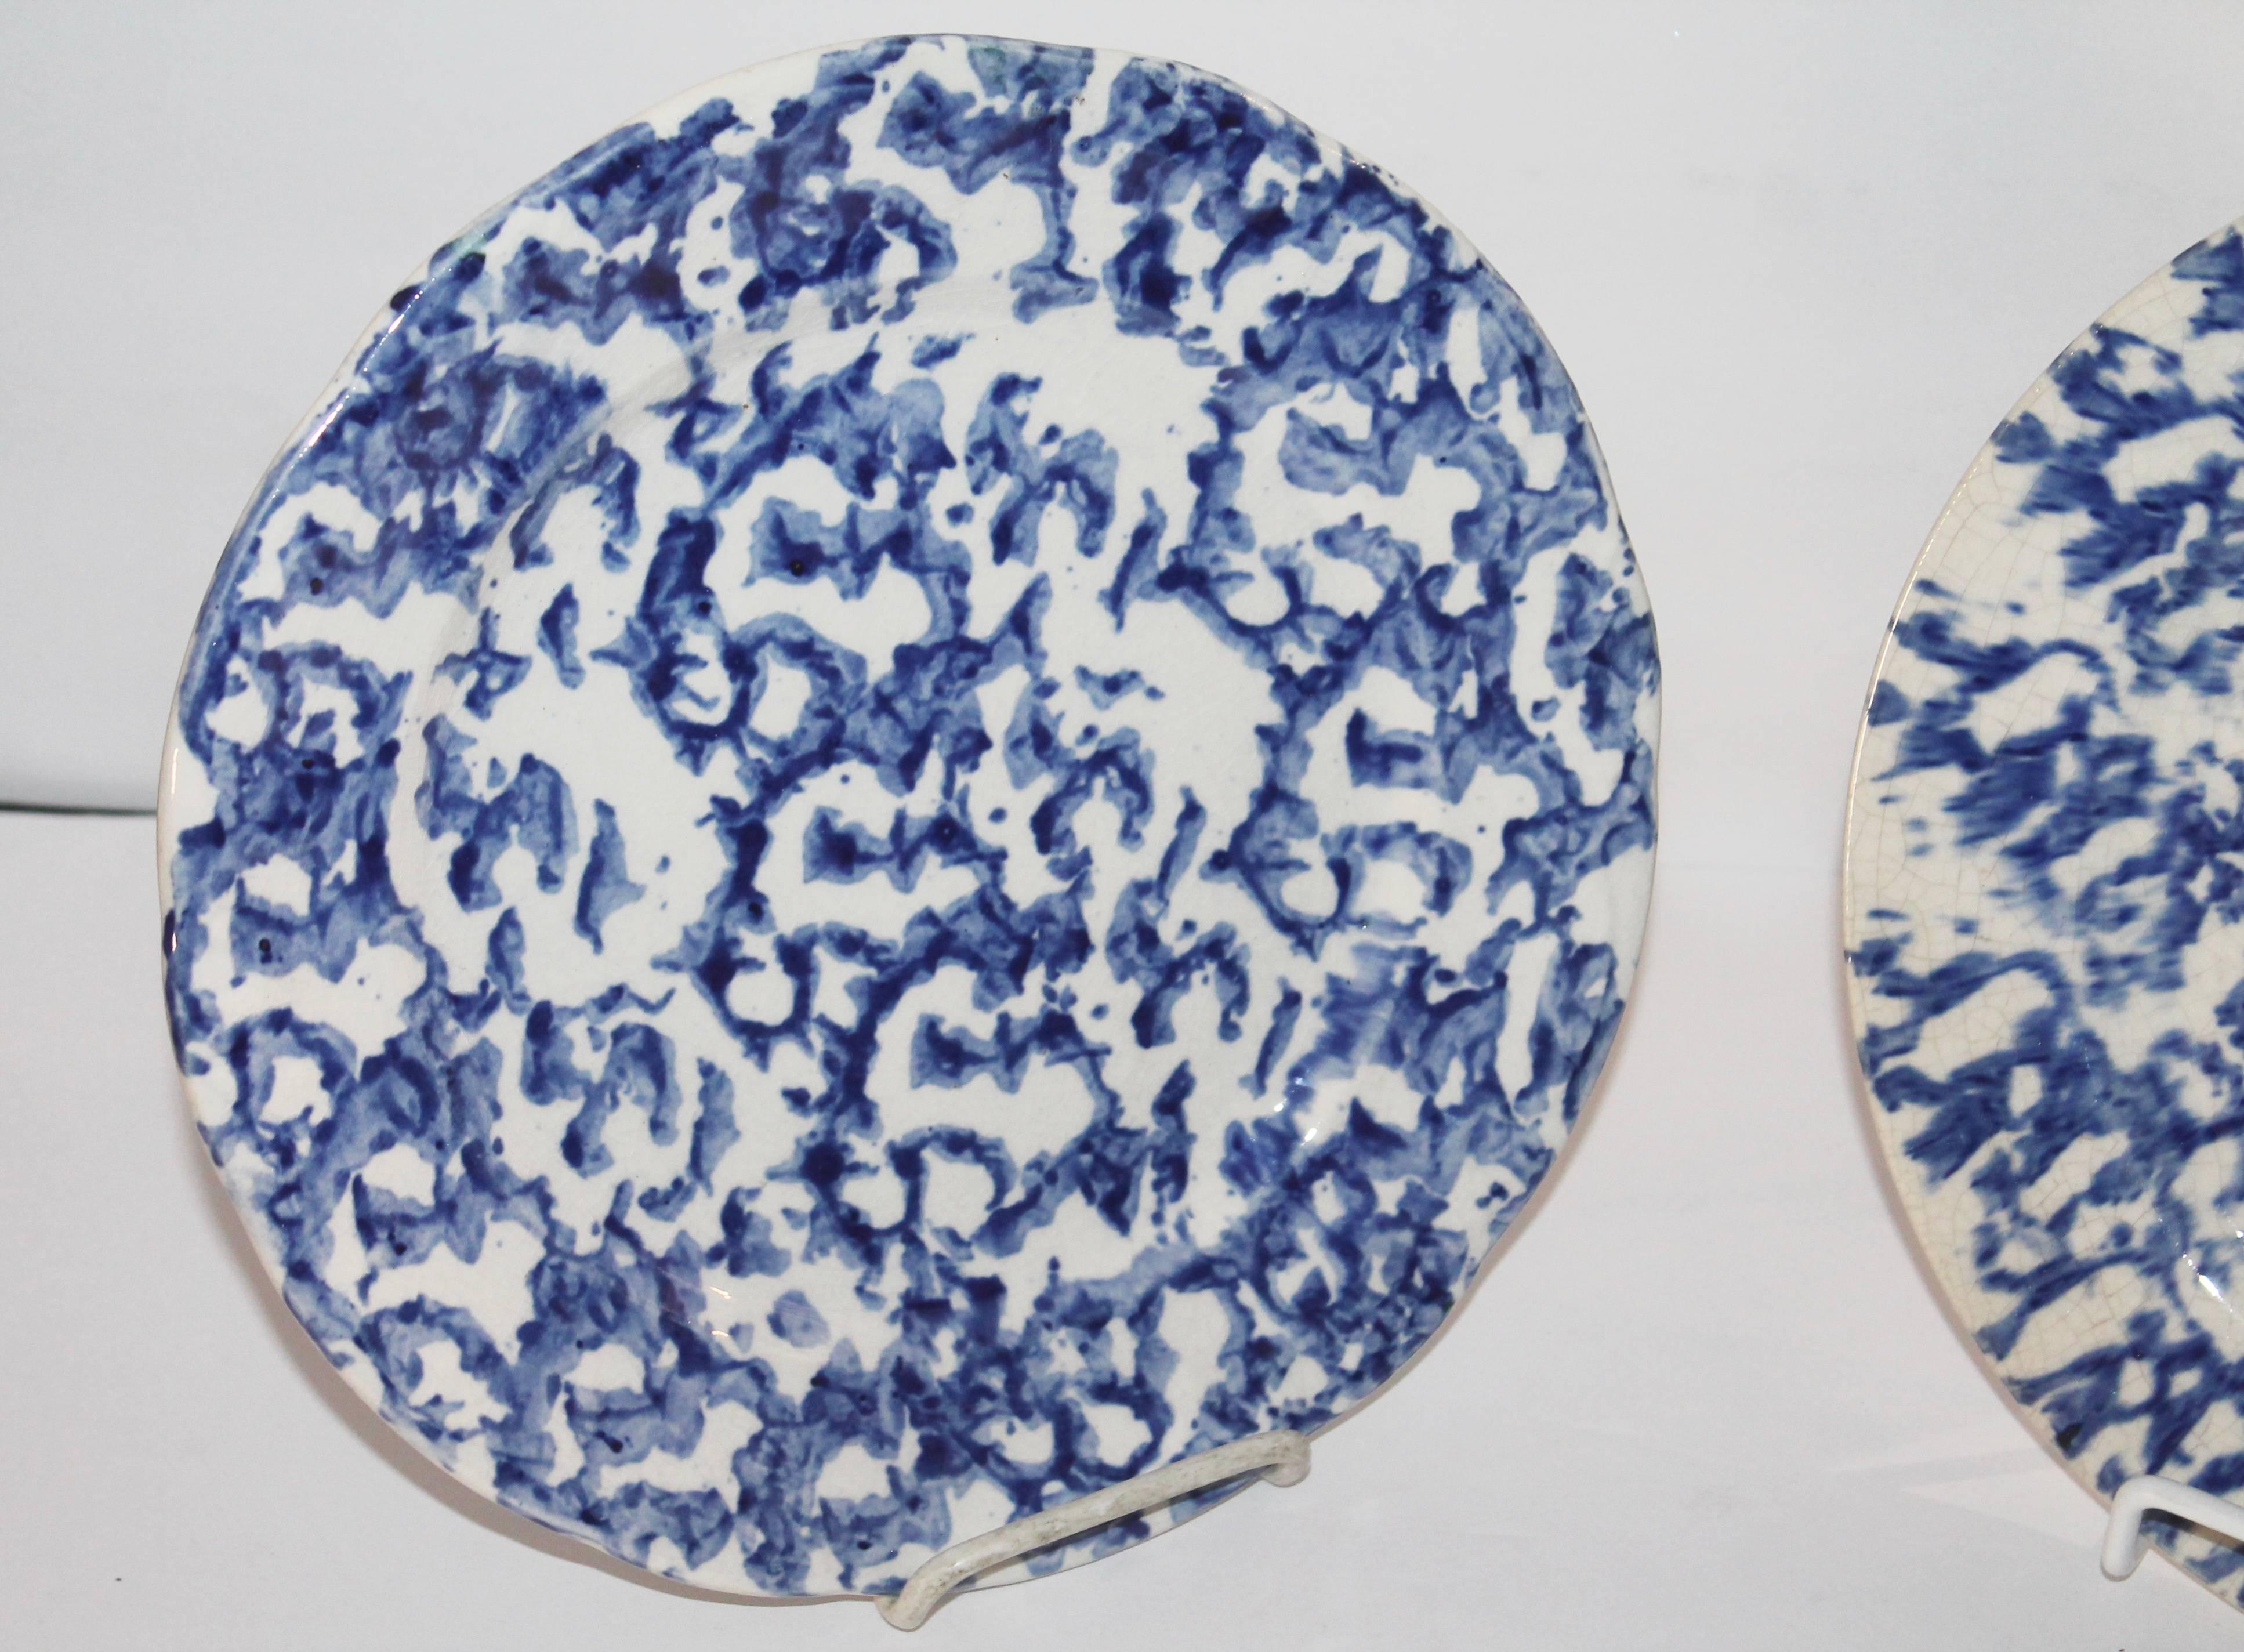 These early sponge pottery plates are 8 1/2 